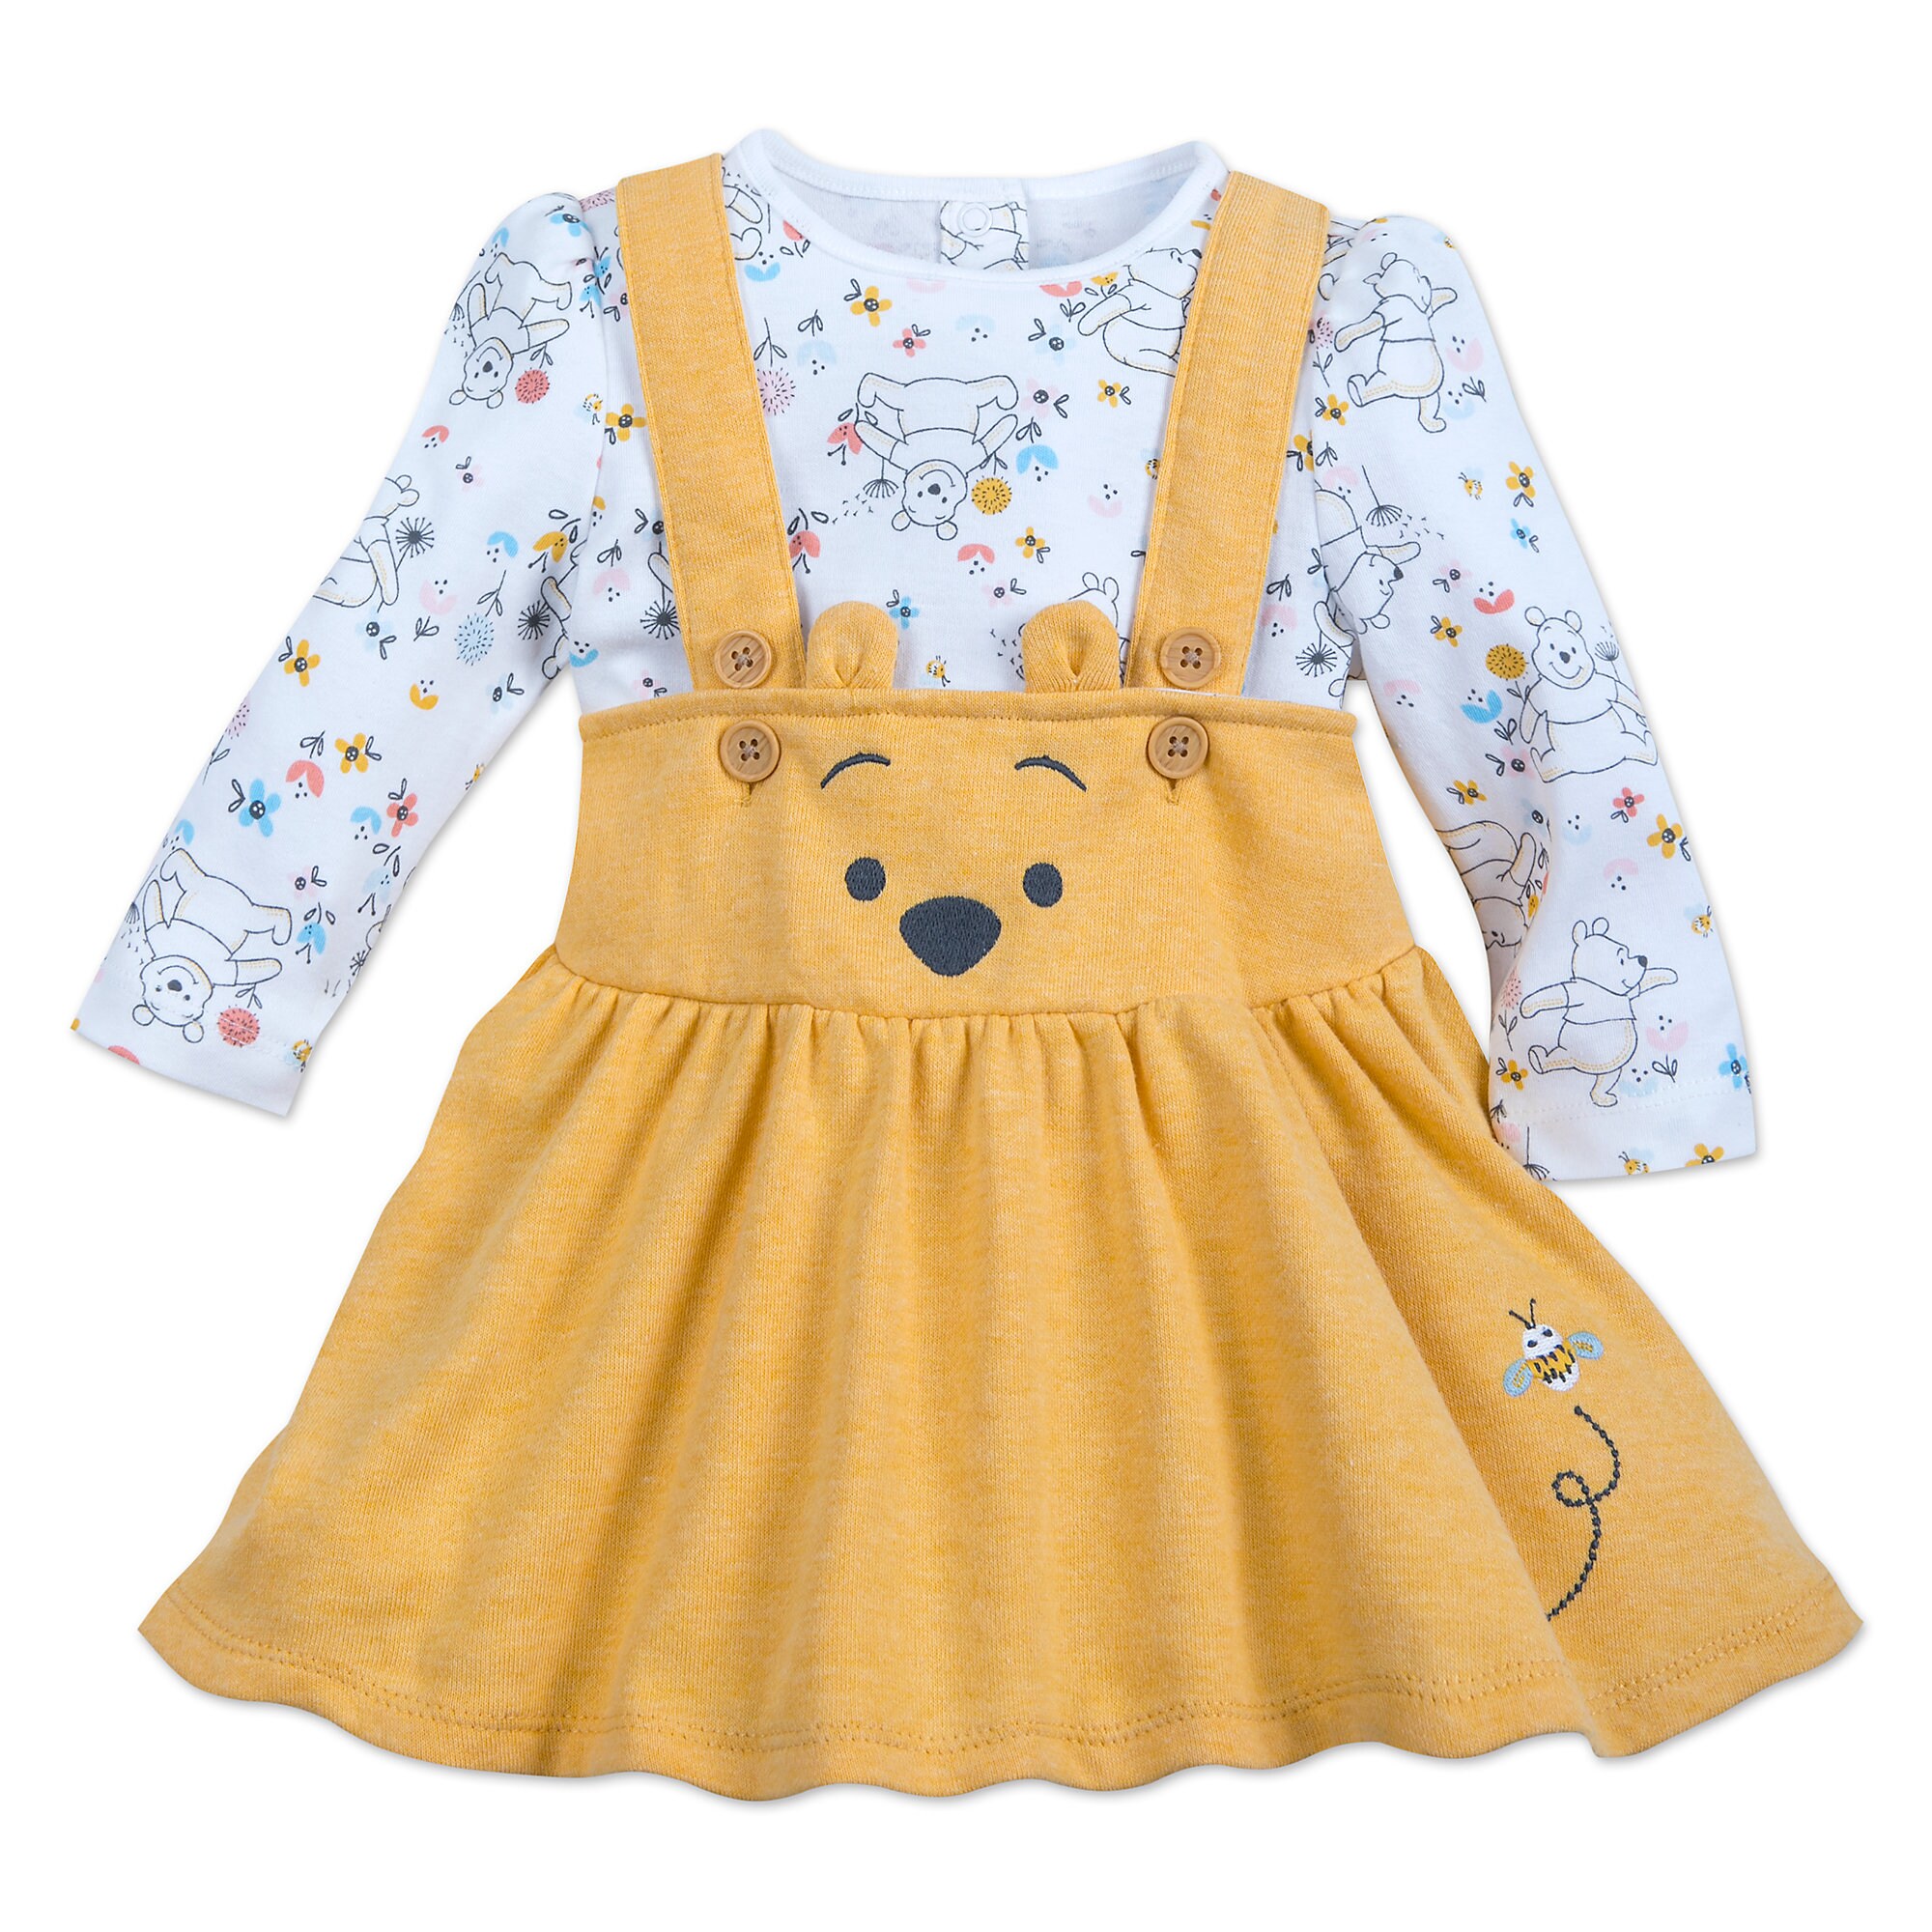 Winnie the Pooh Jumper Set for Baby